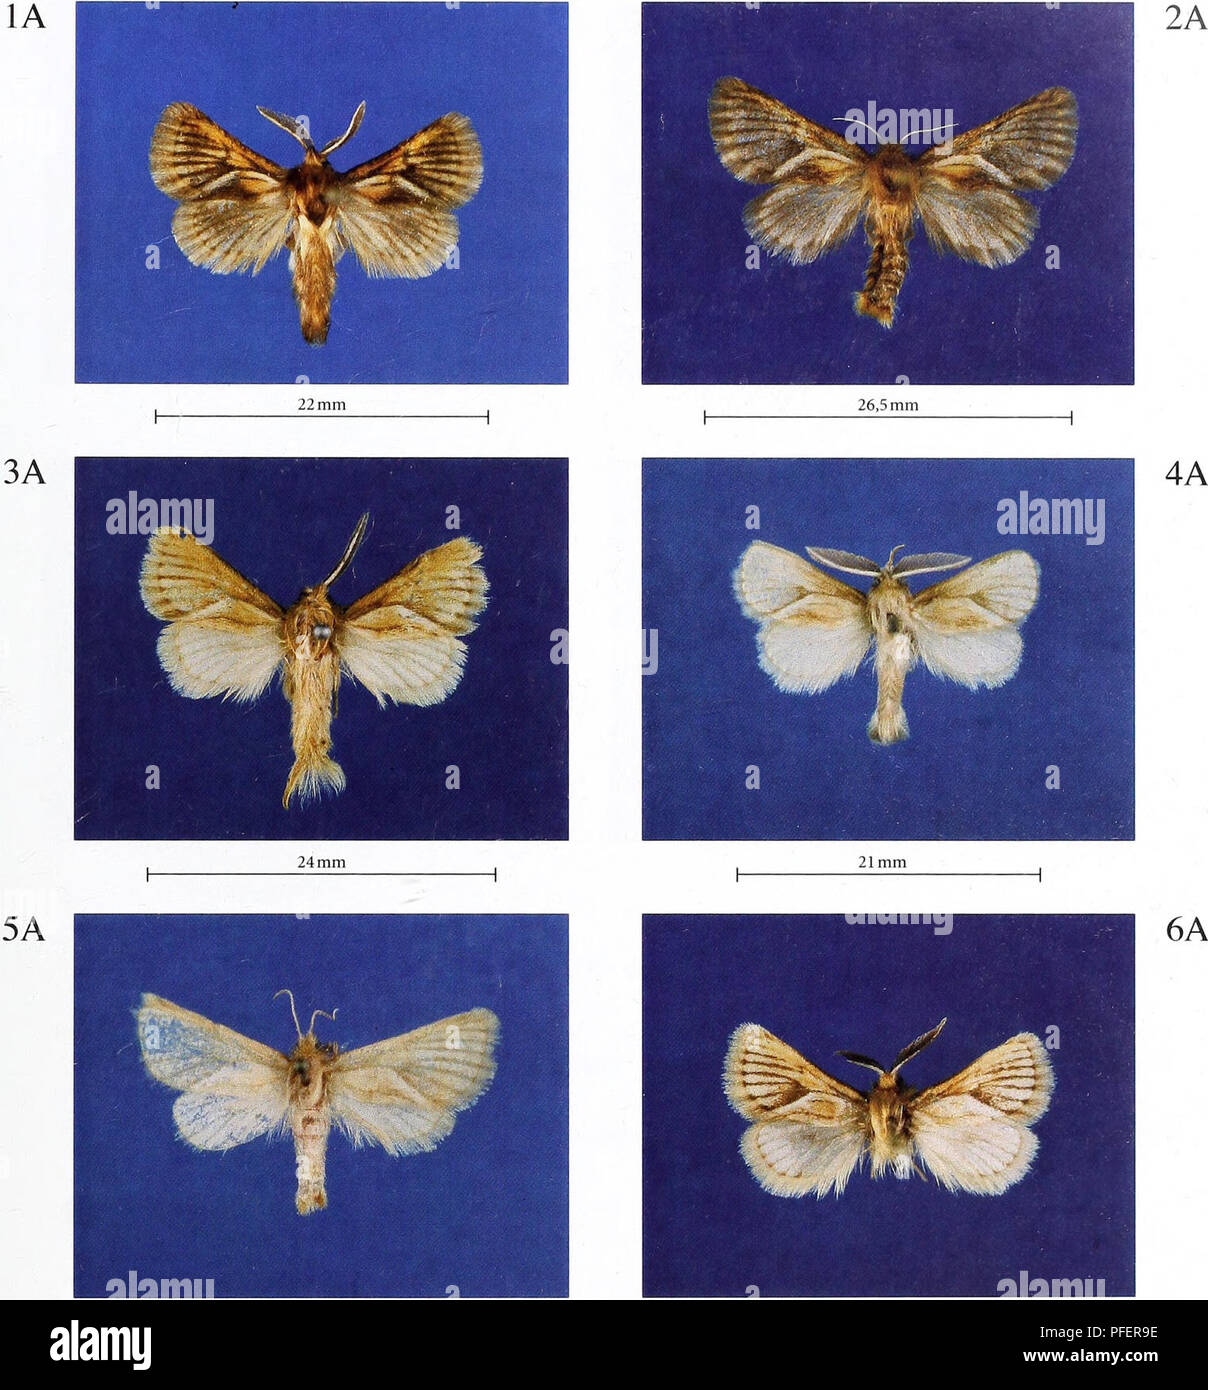 . Description of two new genera and ten new species of Metarbelidae (Lepidoptera: Cossoidea) from western, north-central and eastern Africa with notes on habitats and biogeography. . 26 mm ^ ^ 23 mm Mountelgonia percivali sp. nov., male, holotype, Kenya, Rift Valley Province, Mount Elgon National Park. Mountelgonia percivali sp. nov., female, paratype, Kenya, Rift Valley Province, Mount Elgon National Park. Mountelgonia lumbuaensis sp. nov., male, paratype, Kenya, Rift Valley Province, Lumbua (or Lumbwa). Mountelgonia arcifera (Hampson, 1909), male, Kenya, Rift Valley Province, Southern Masai  Stock Photo